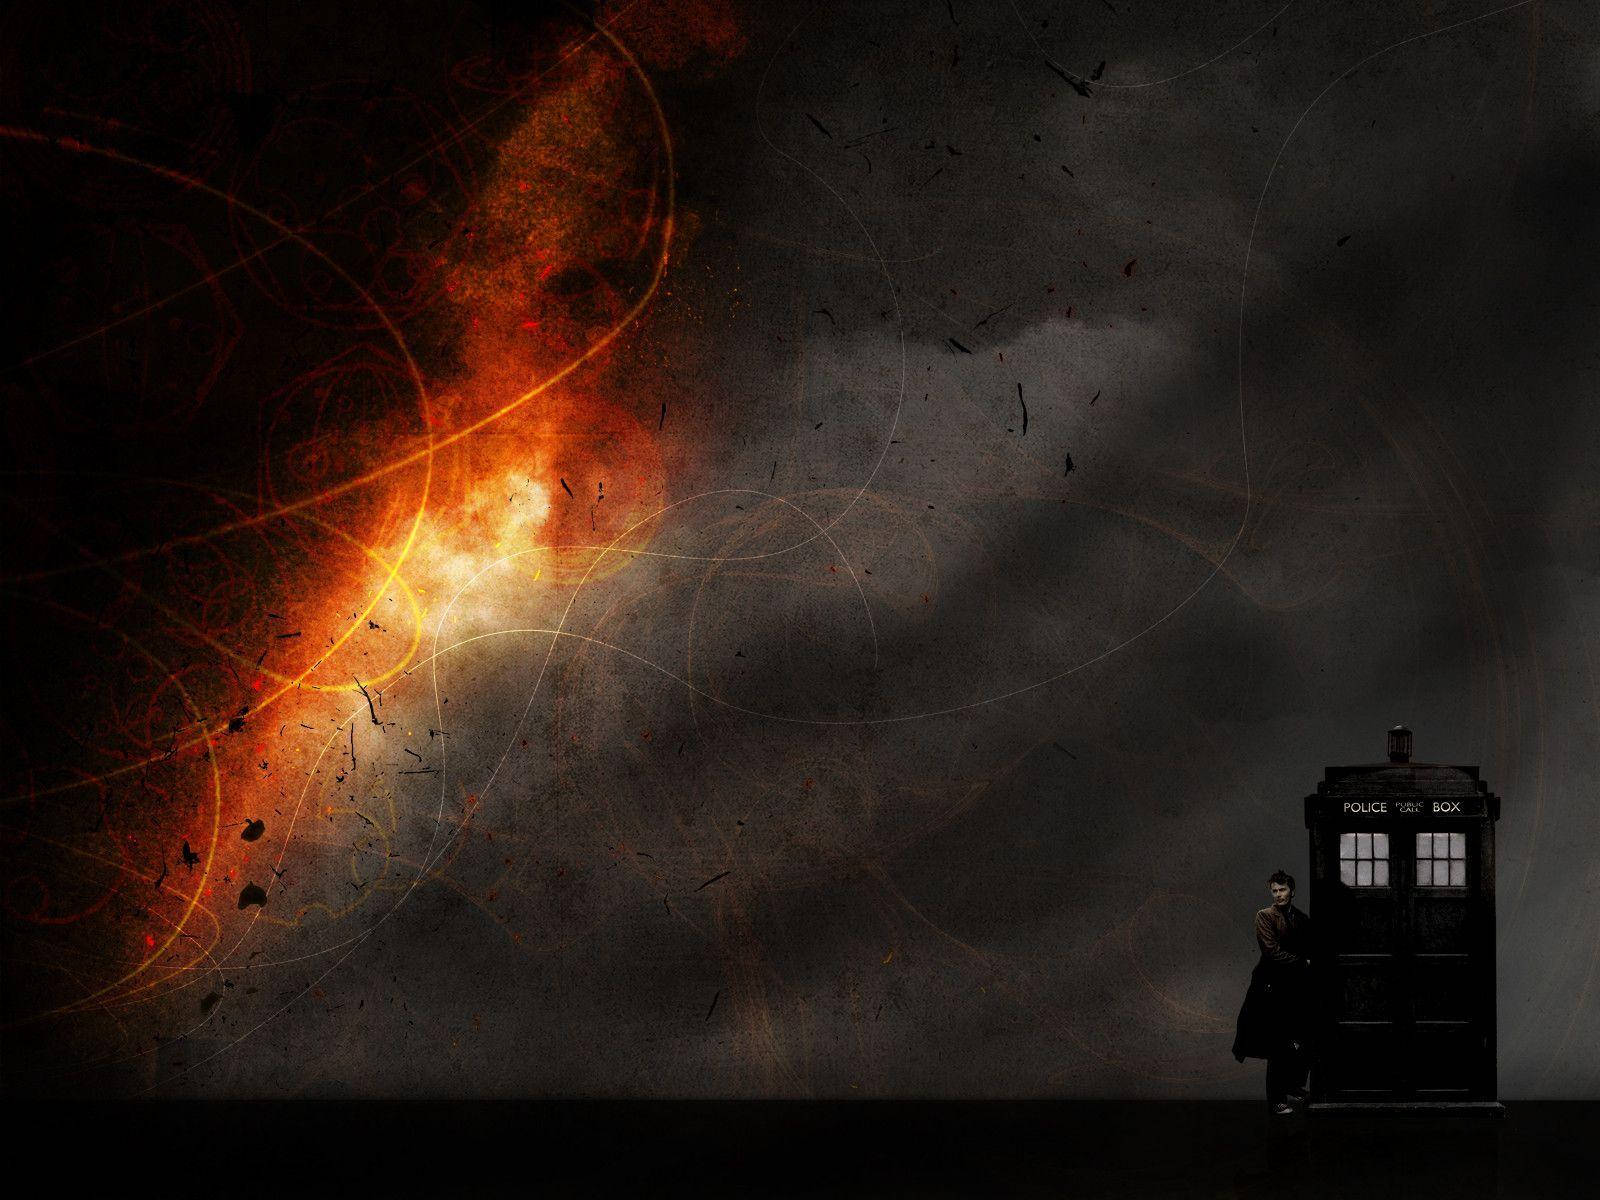 Awe-inspiring Snapshot Of The Iconic Doctor Who Time Machine, Tardis, In Hd Quality.